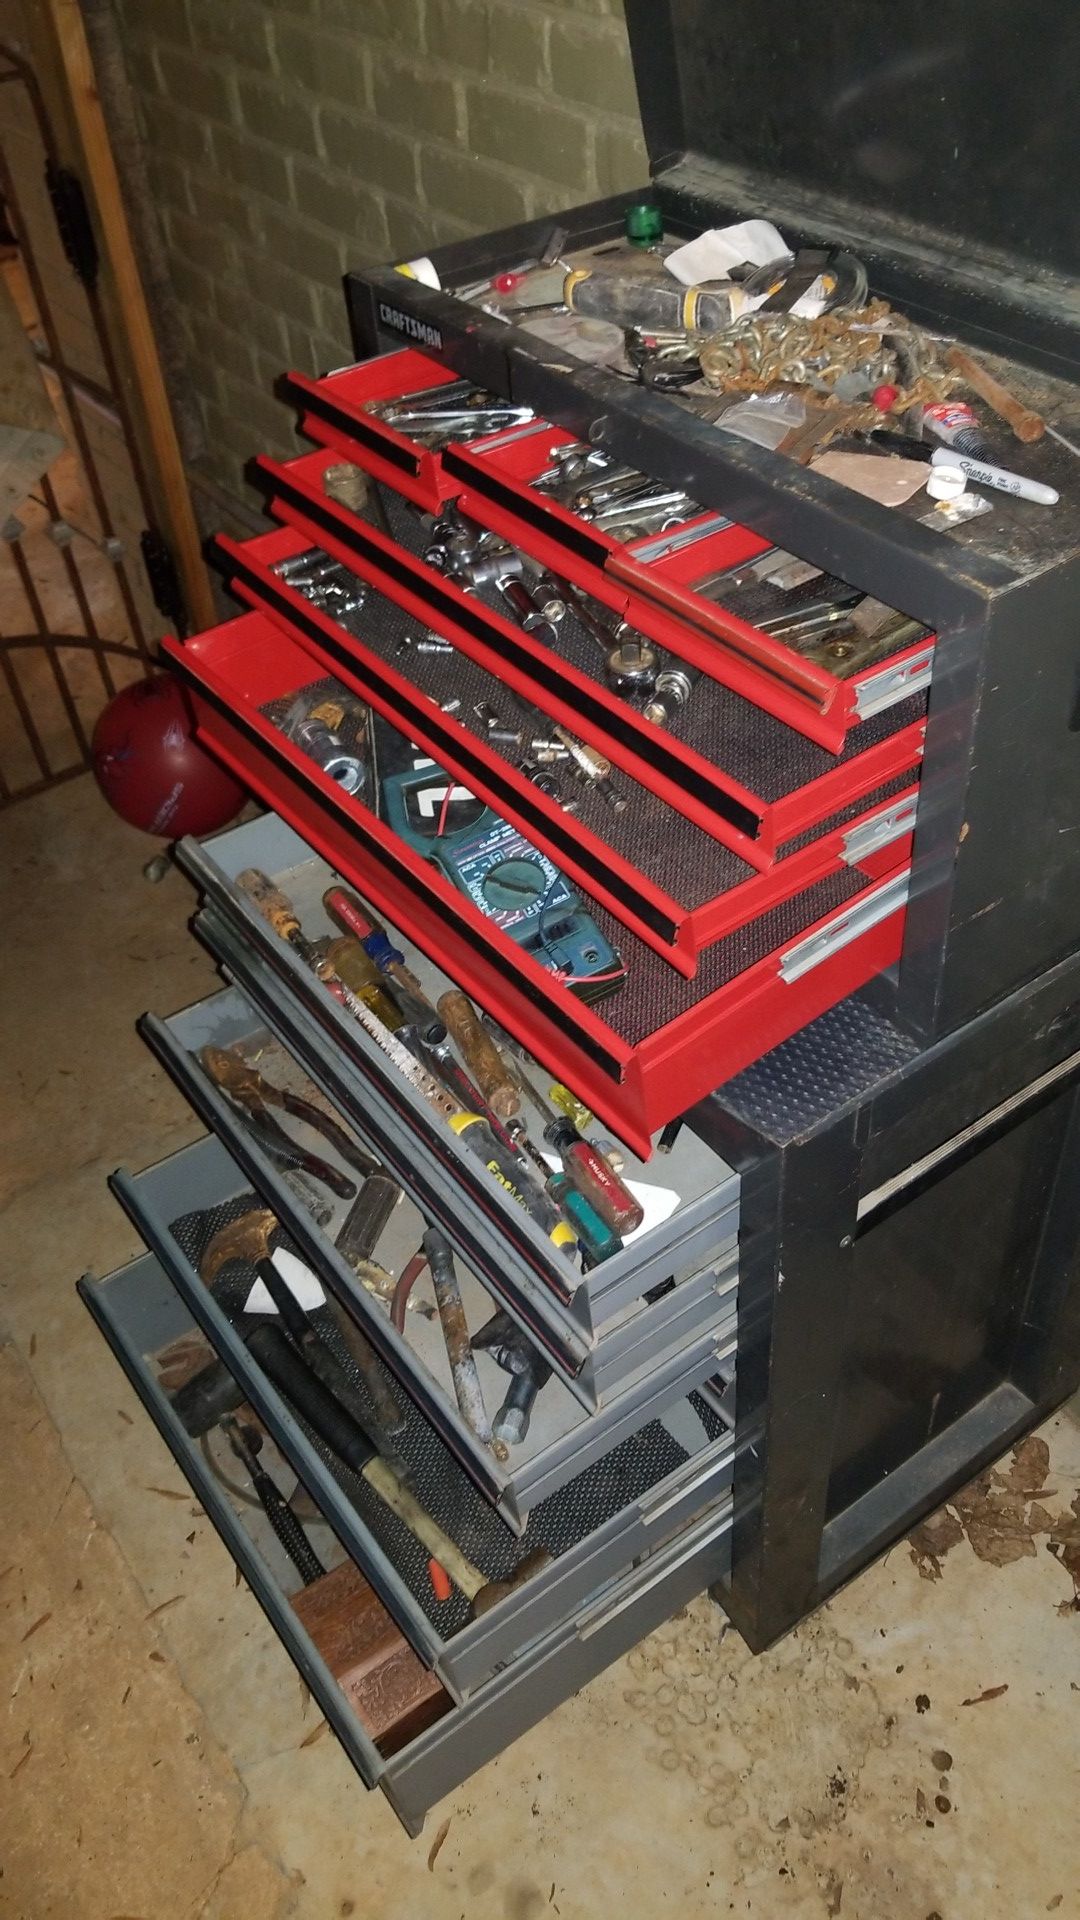 Double stack tool box